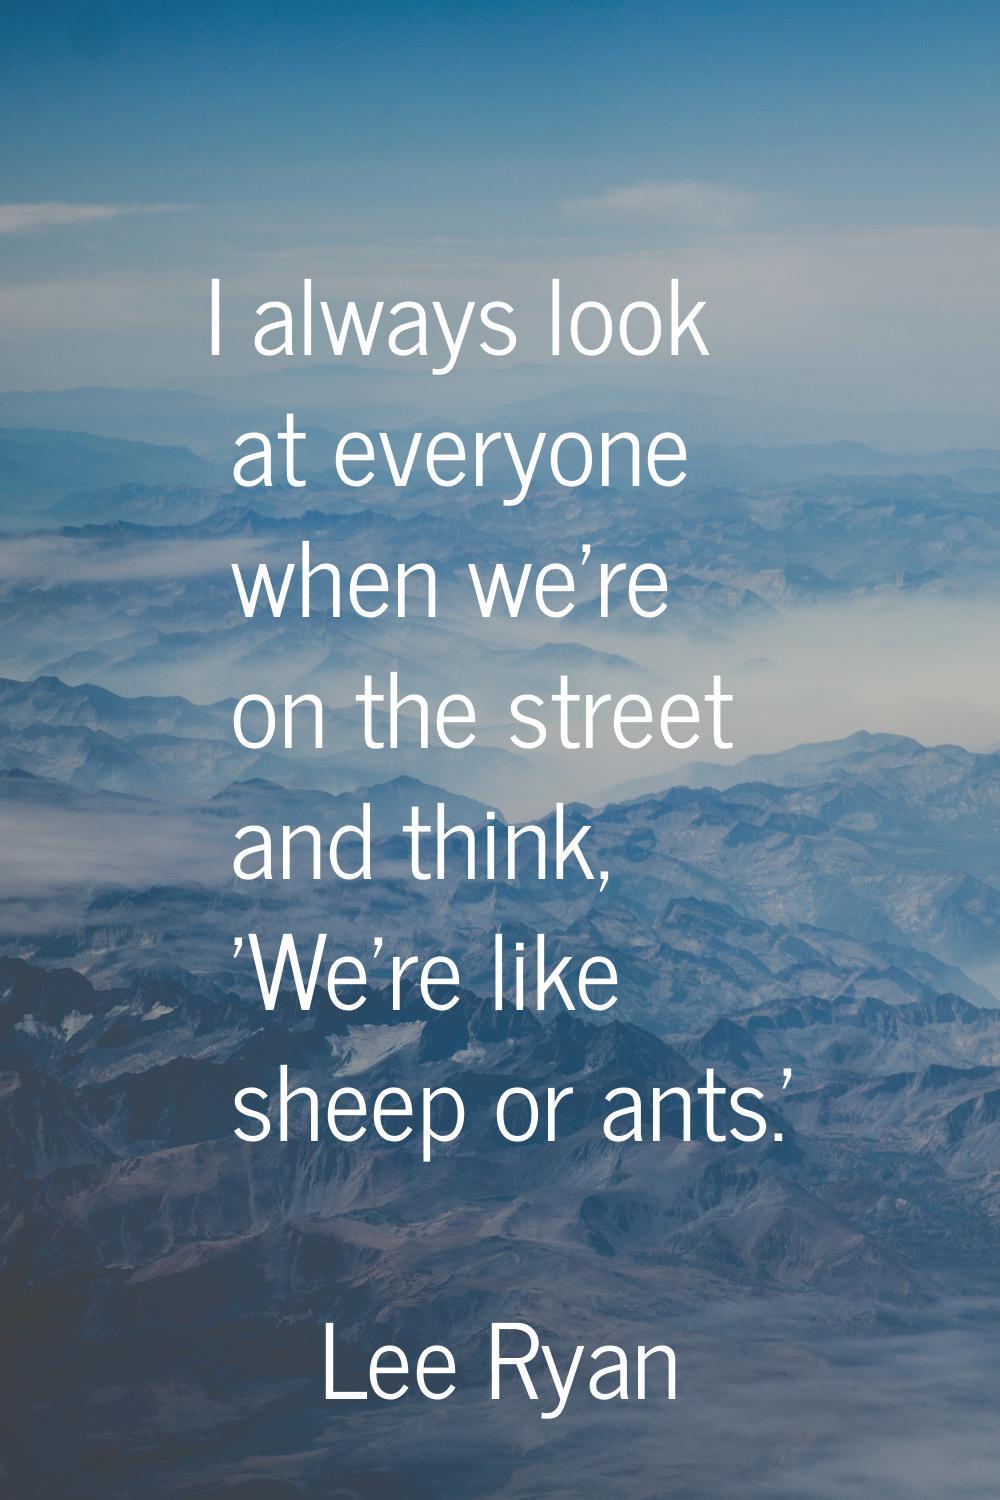 I always look at everyone when we're on the street and think, 'We're like sheep or ants.'